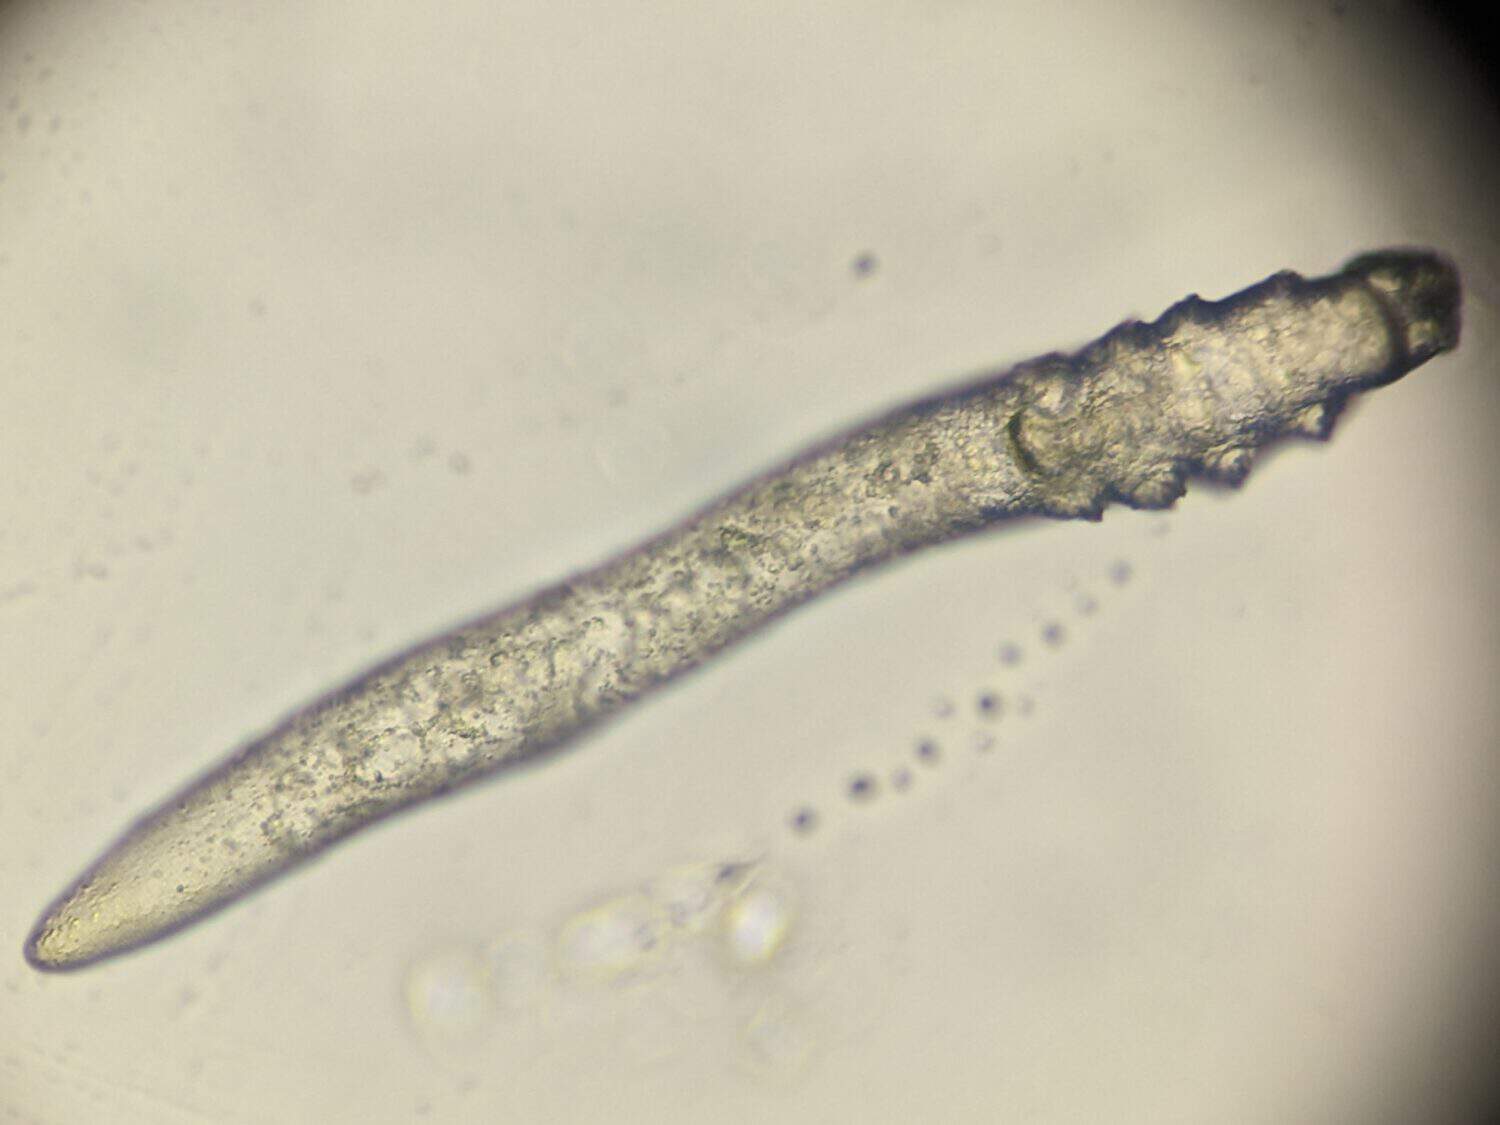 photo of demodex human face parasite under the microscope